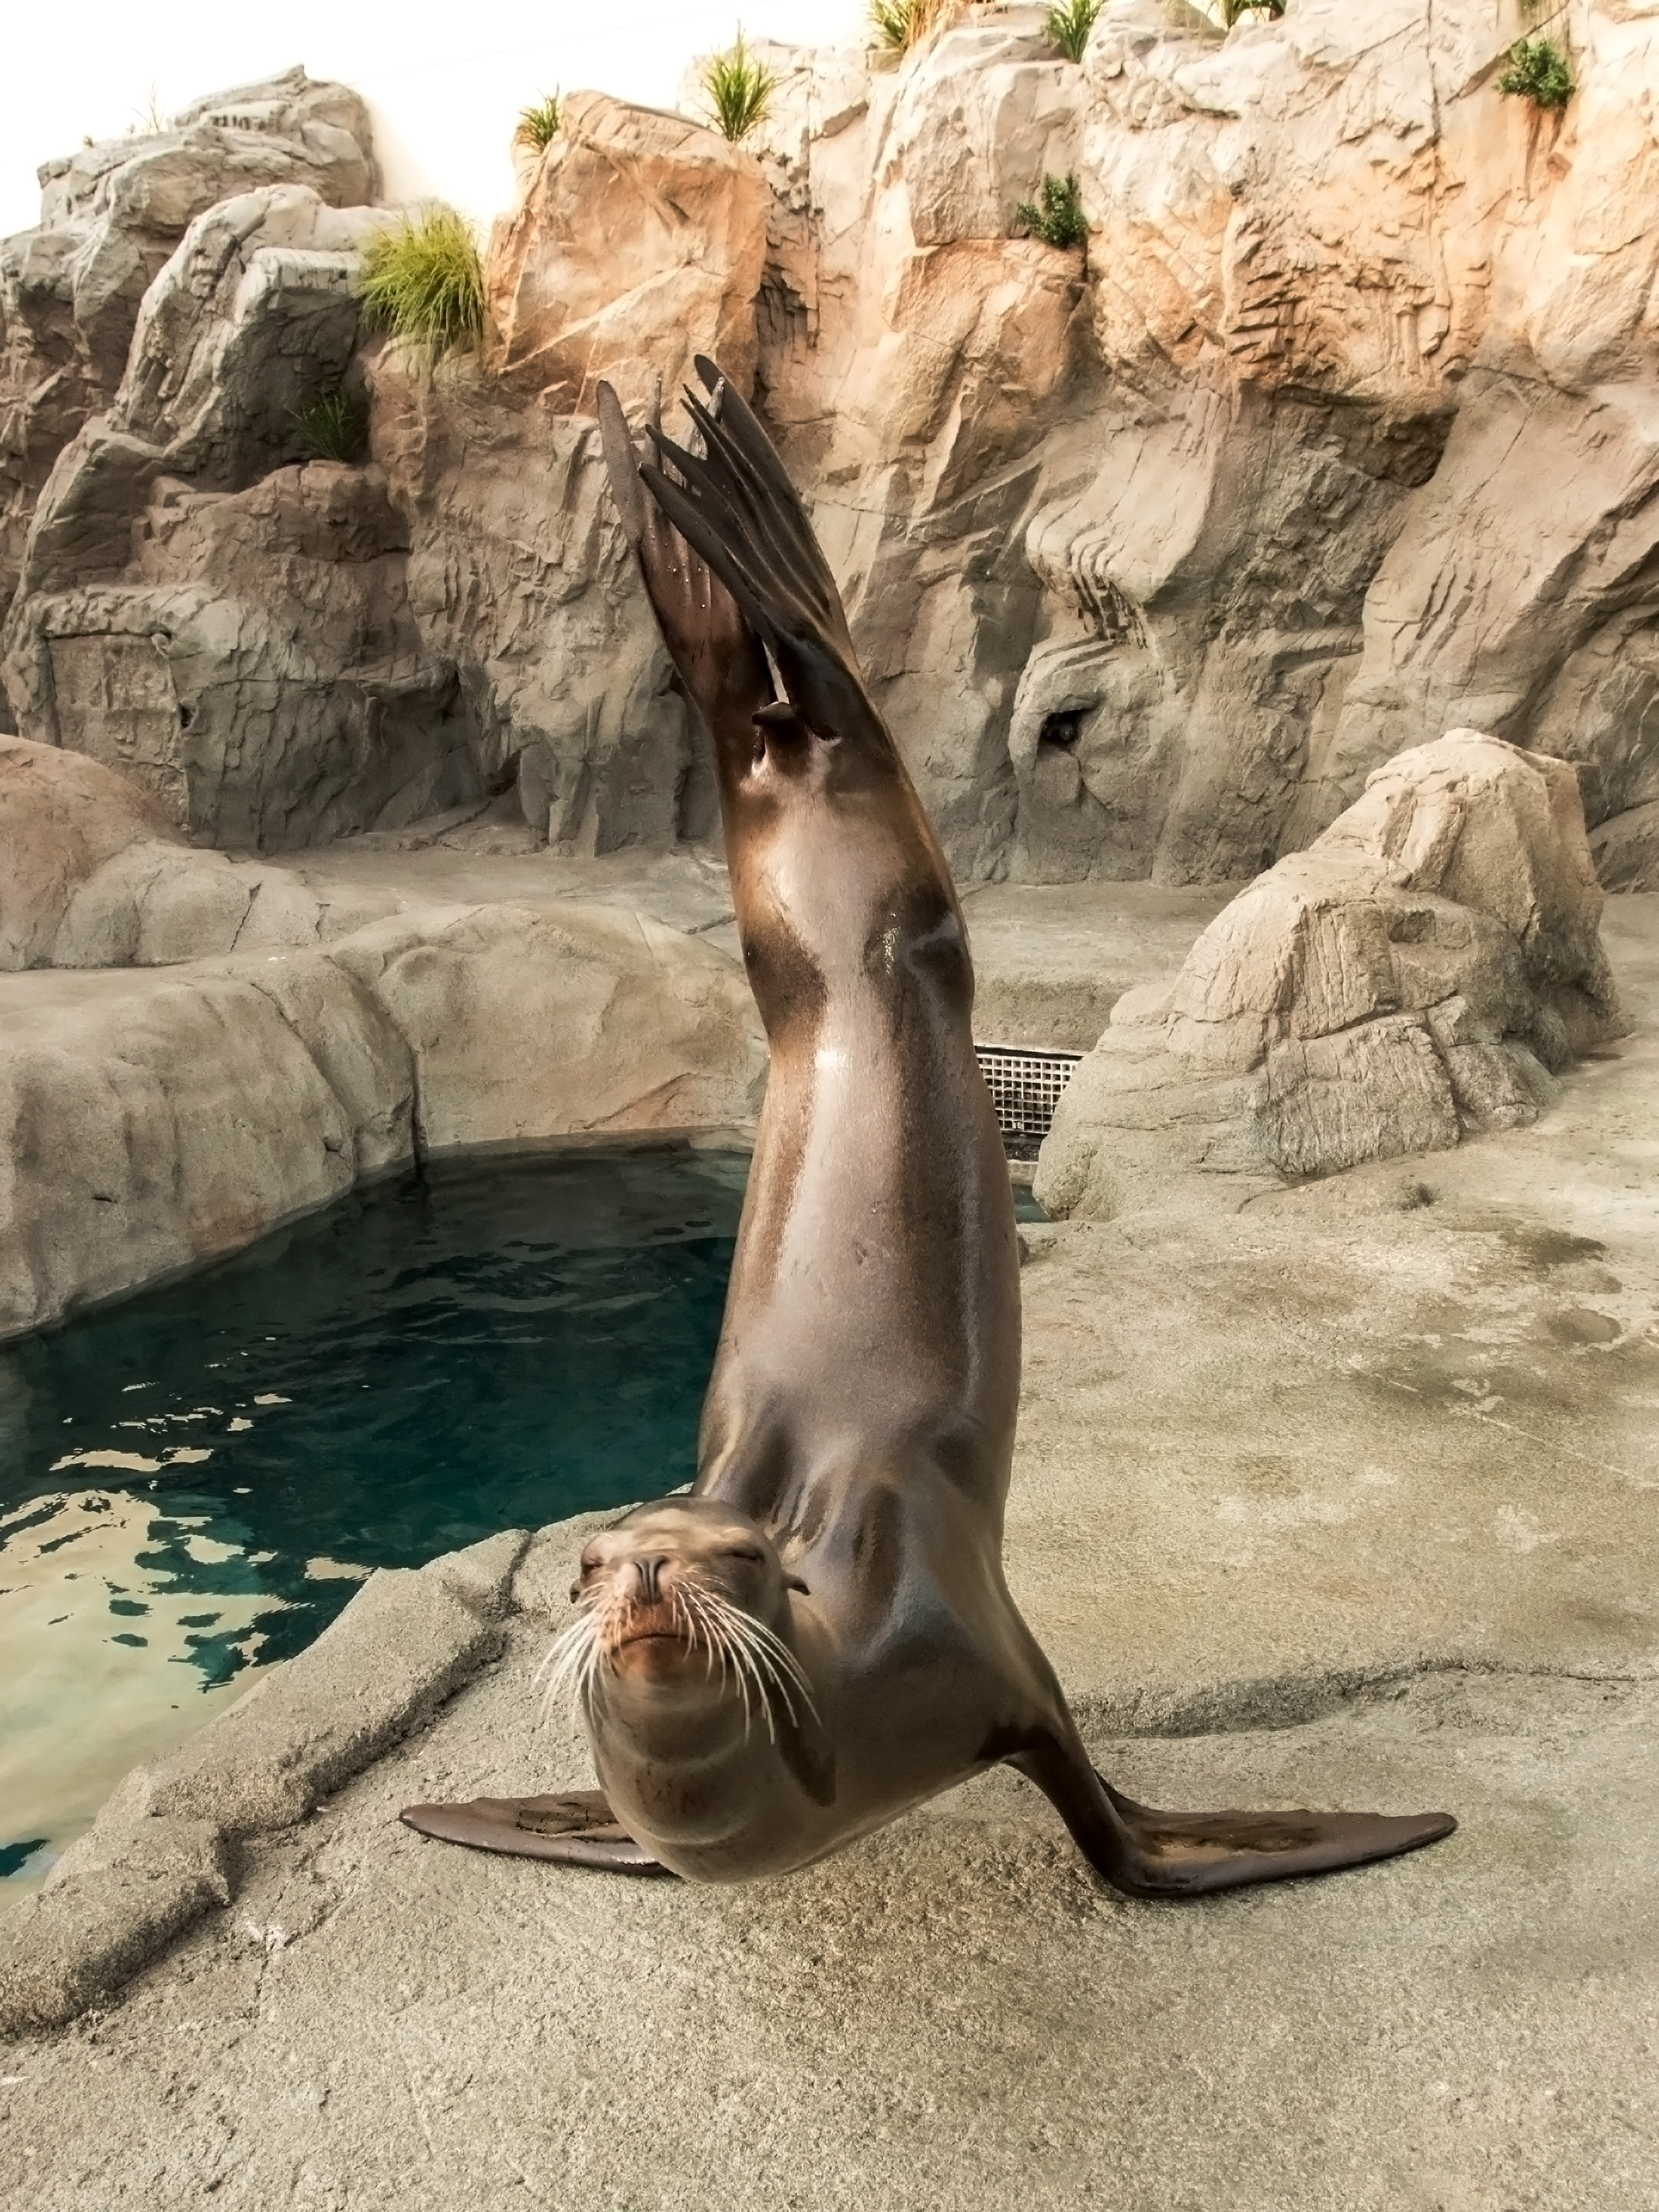 Sea lion doing a handstand